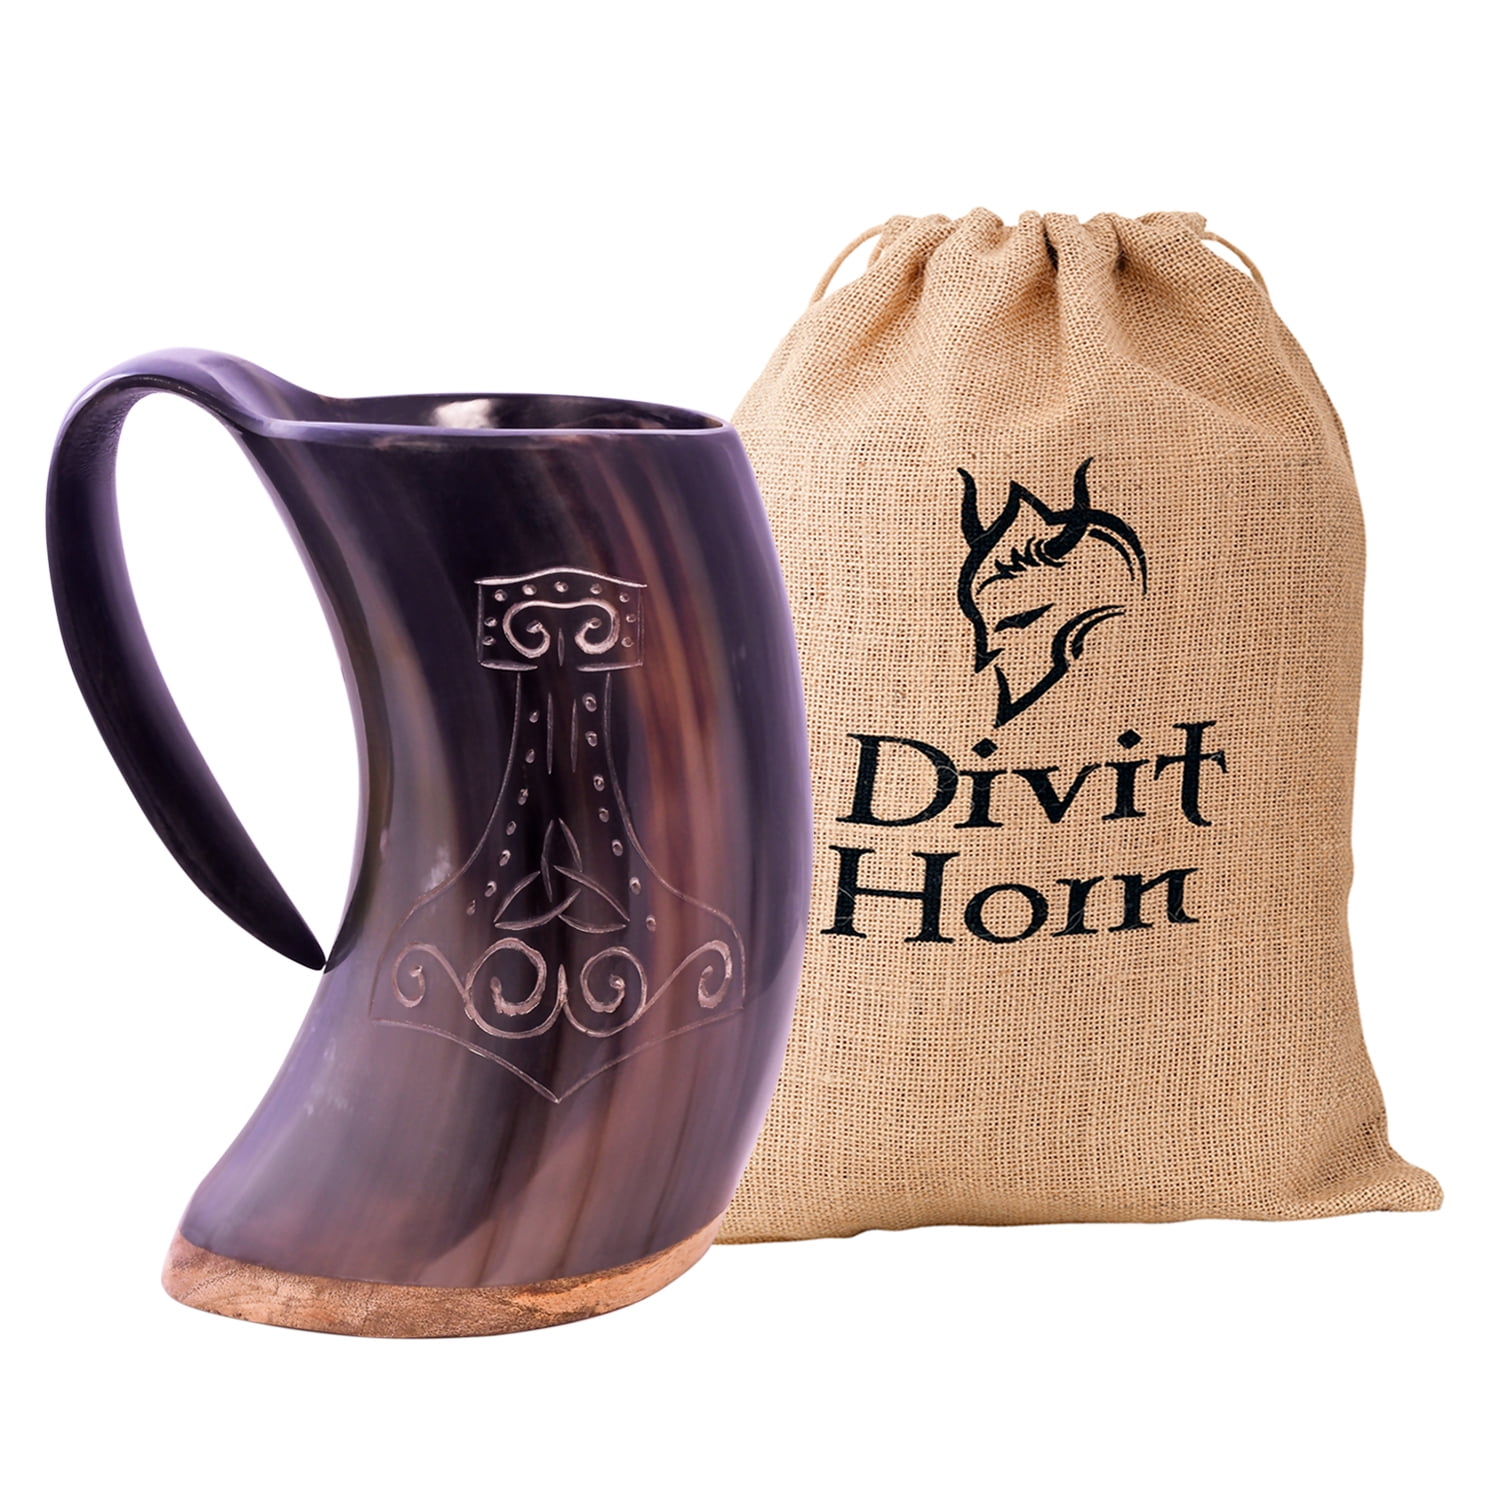 set of 6 Divit Genuine Viking Drinking Horn Mug Authentic Medieval Beer Horn Tankard 24oz capacity horn Cup/Stein. White Shot Glass, Polished 